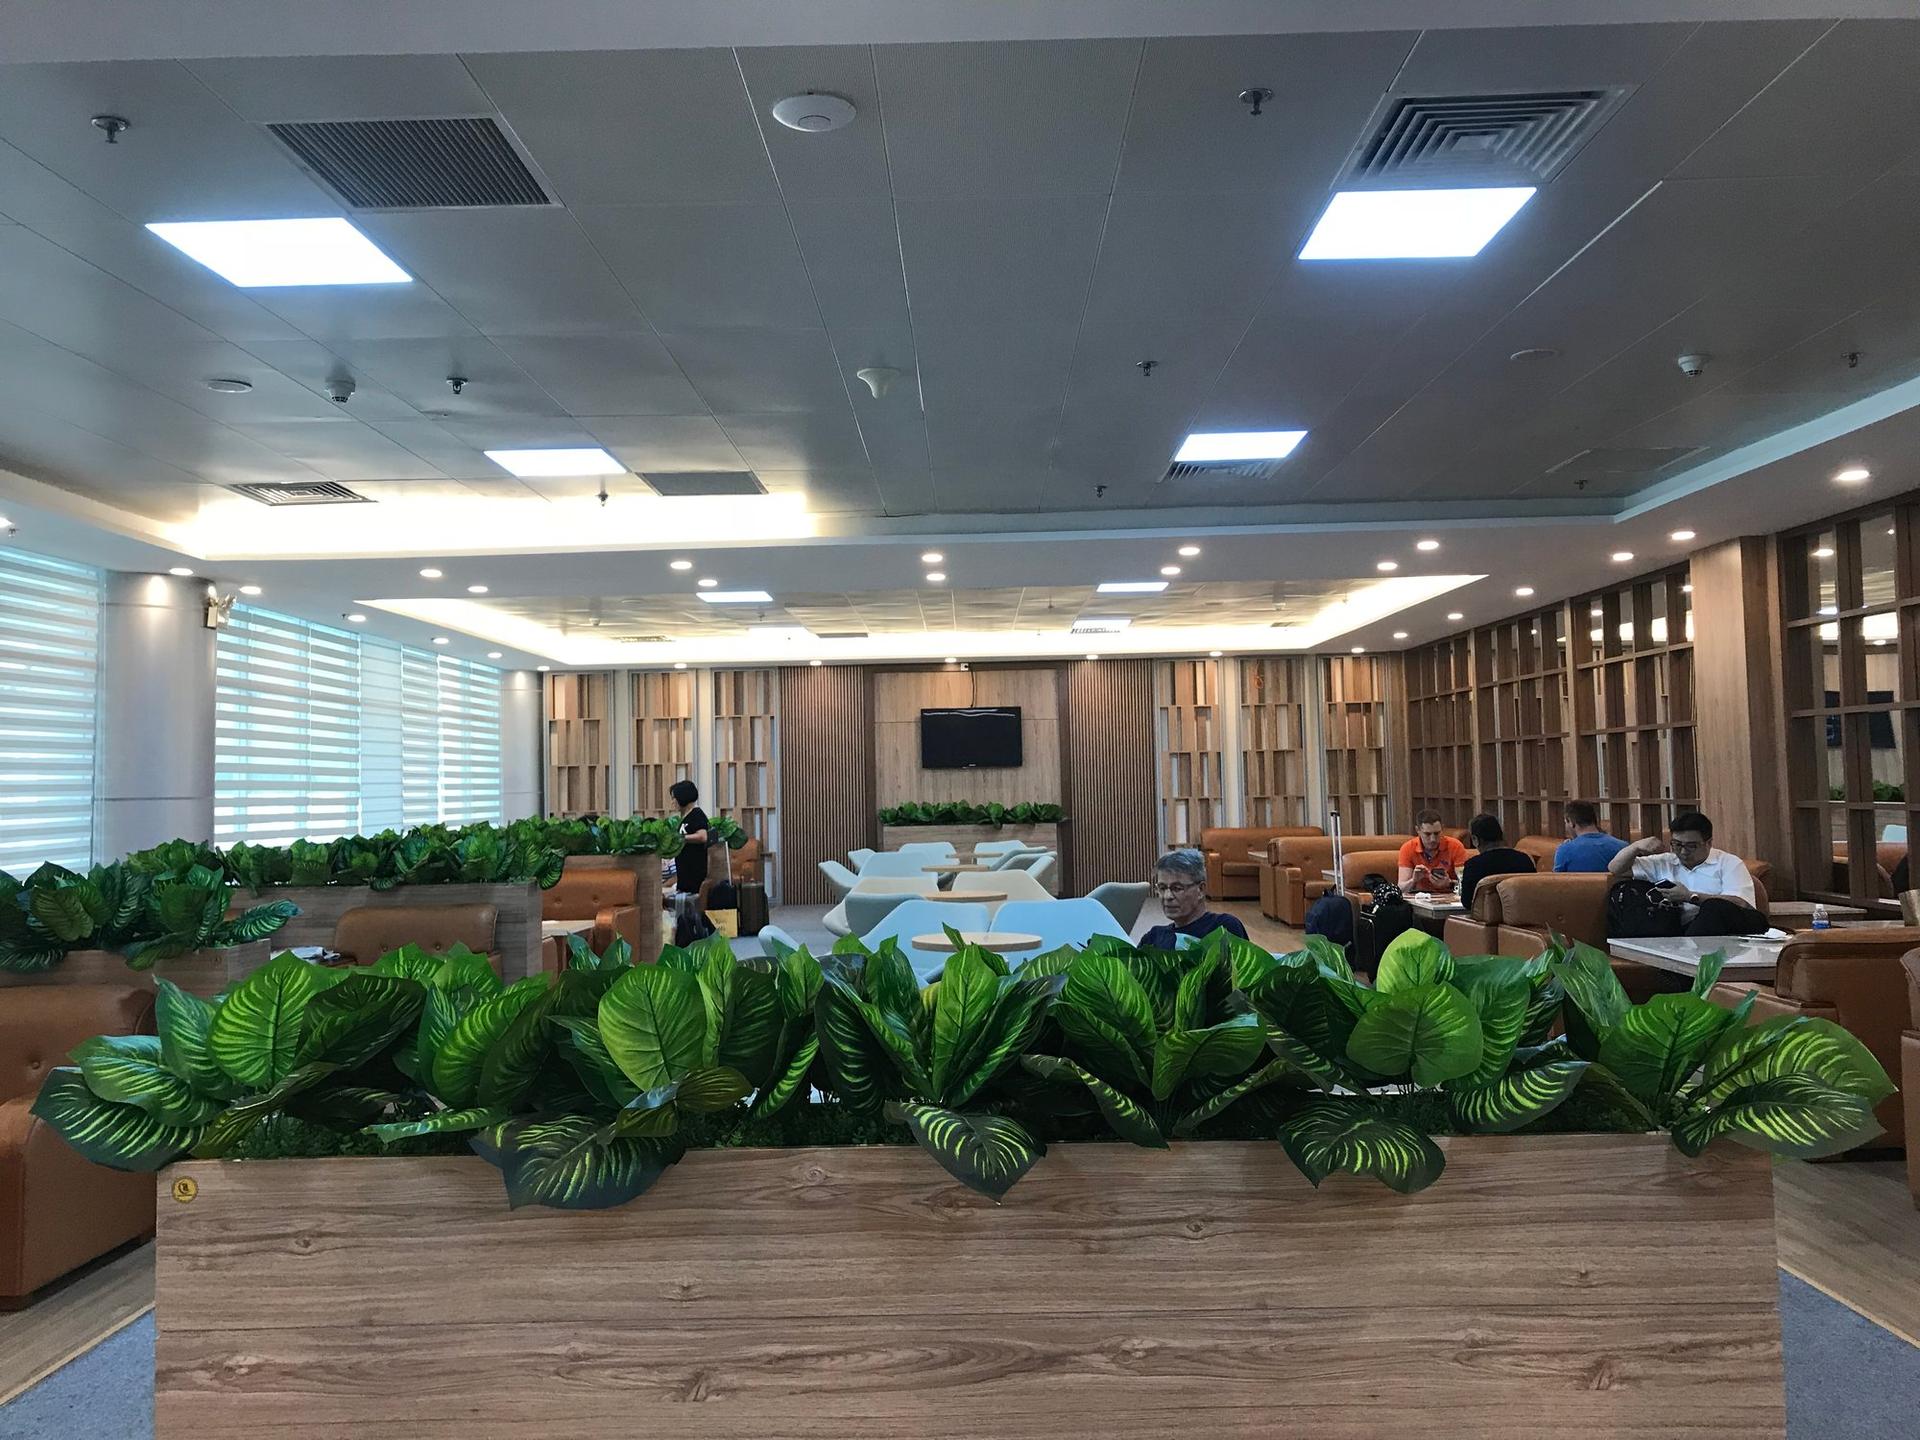 Vietnam Airlines Lounge (Domestic) image 2 of 11